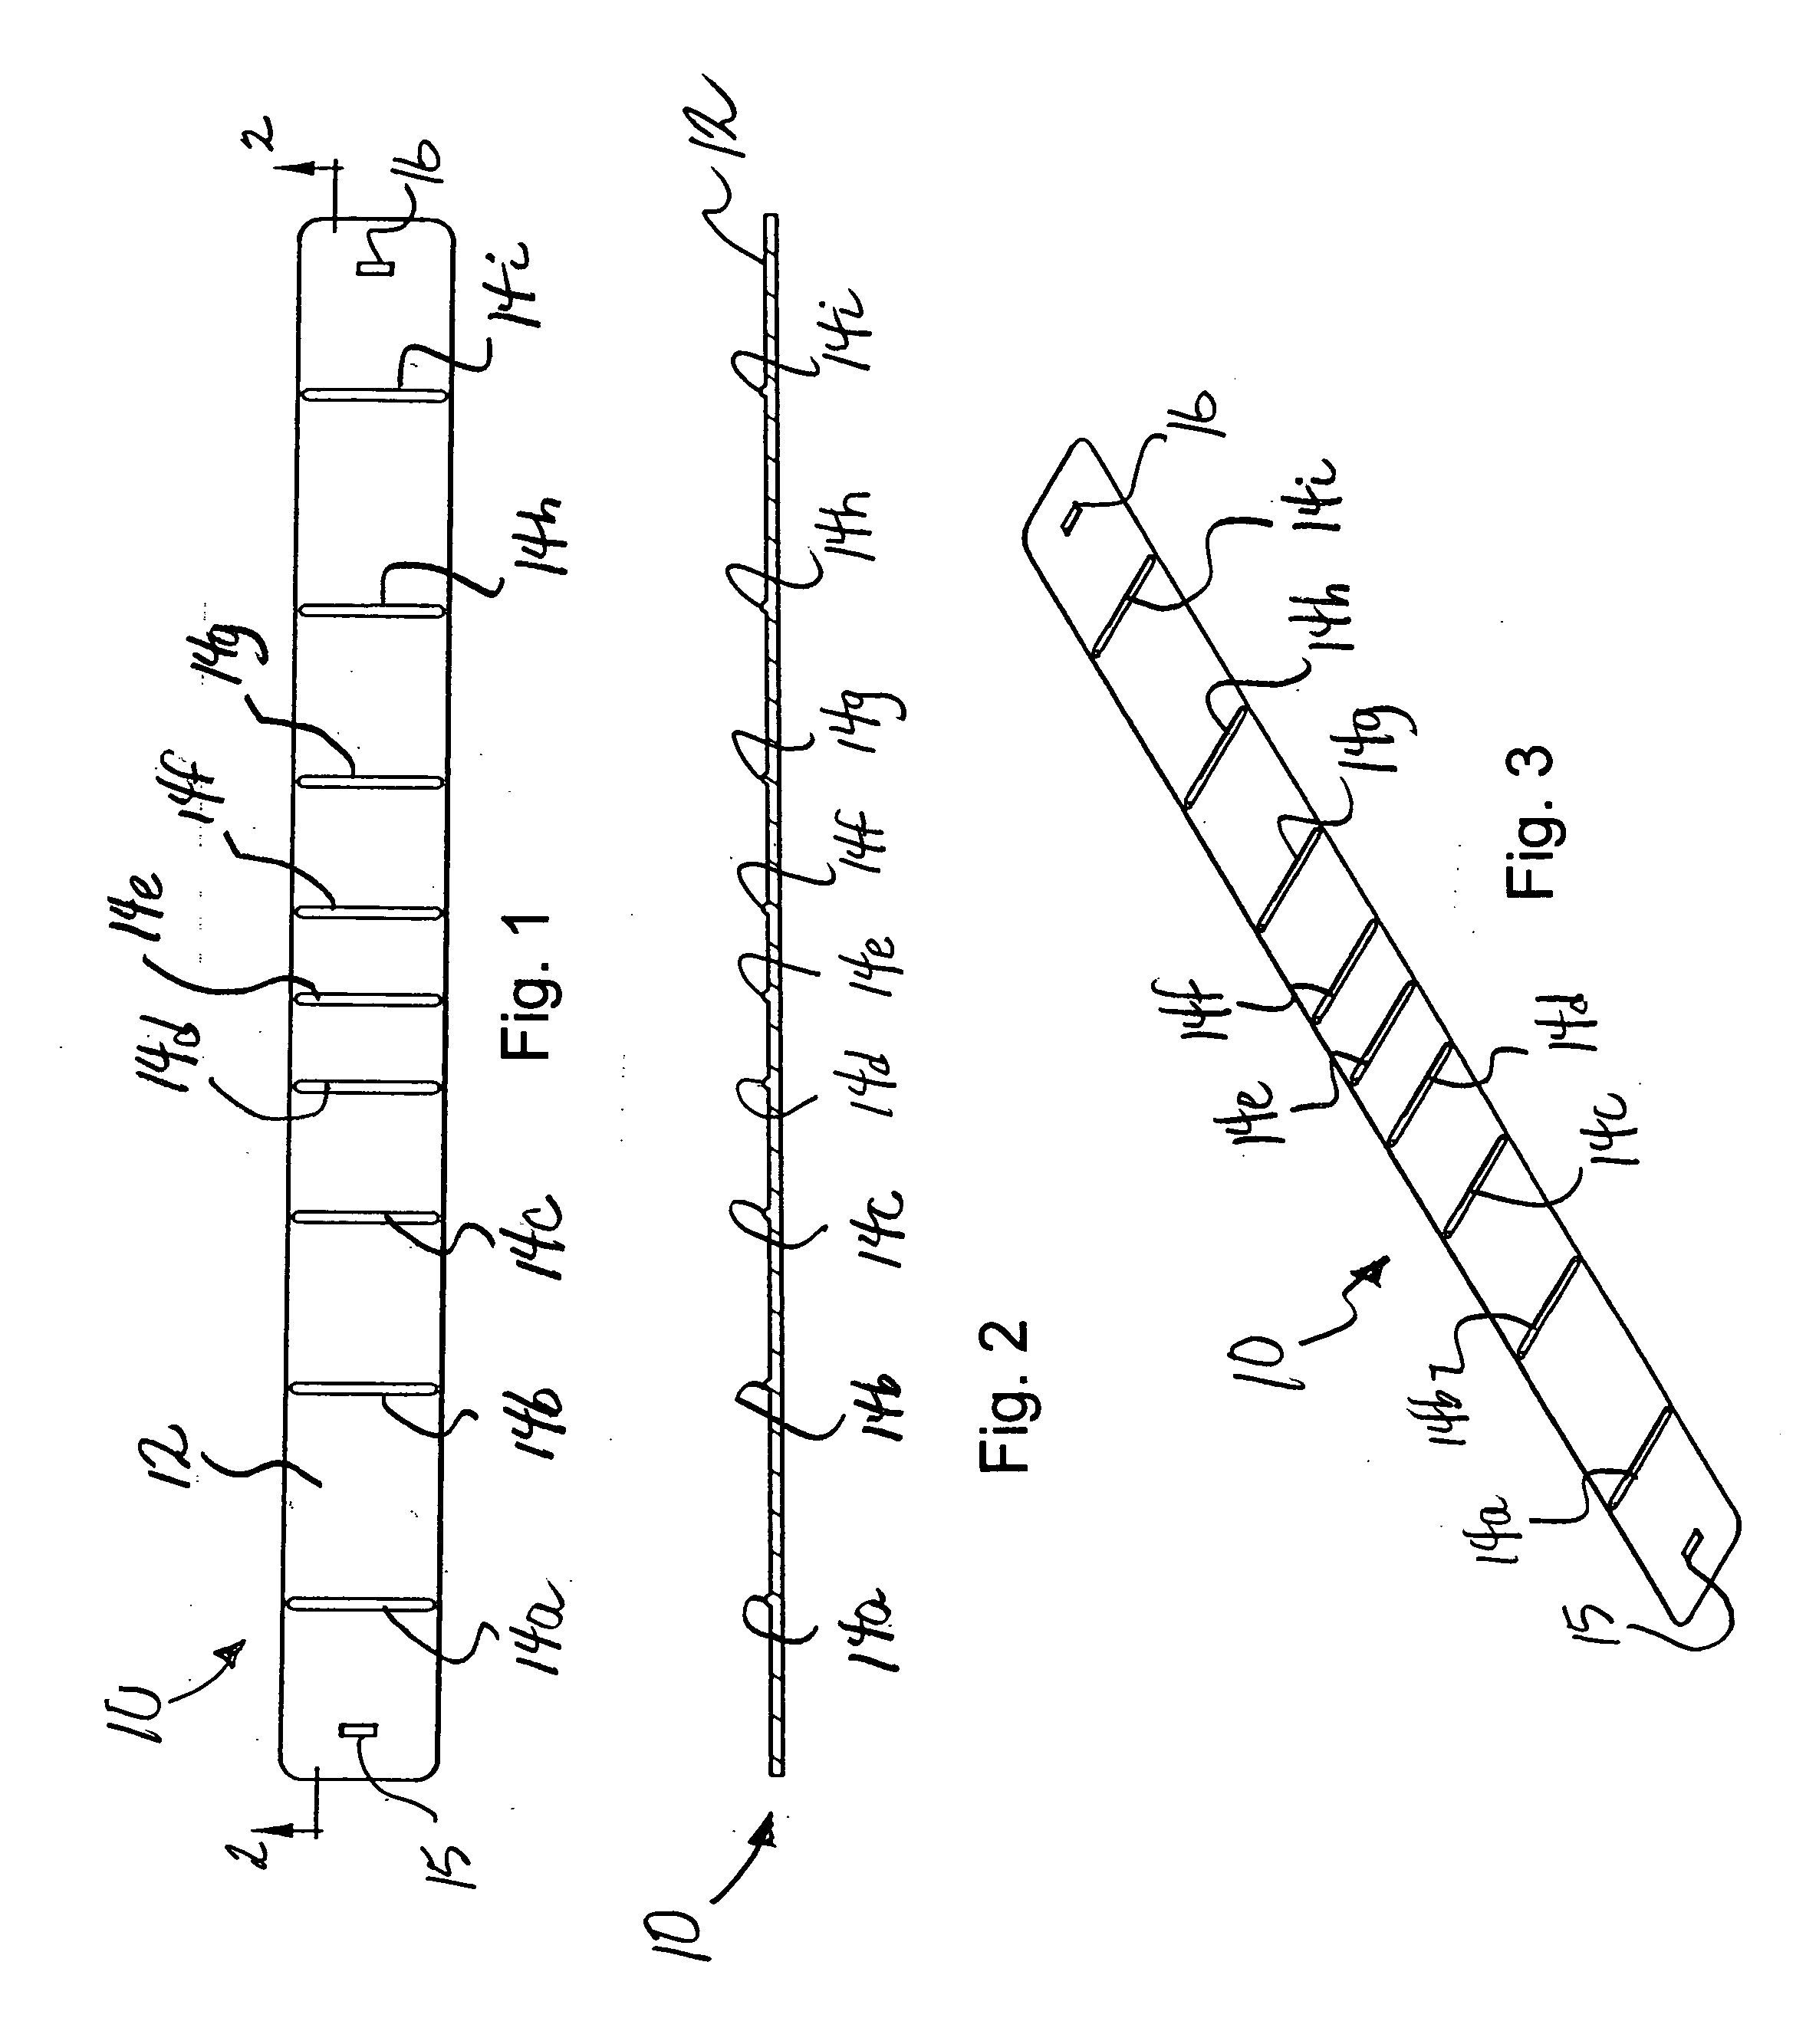 Laterally-reinforced duct saddle, and method for suspending horizontal flexible duct